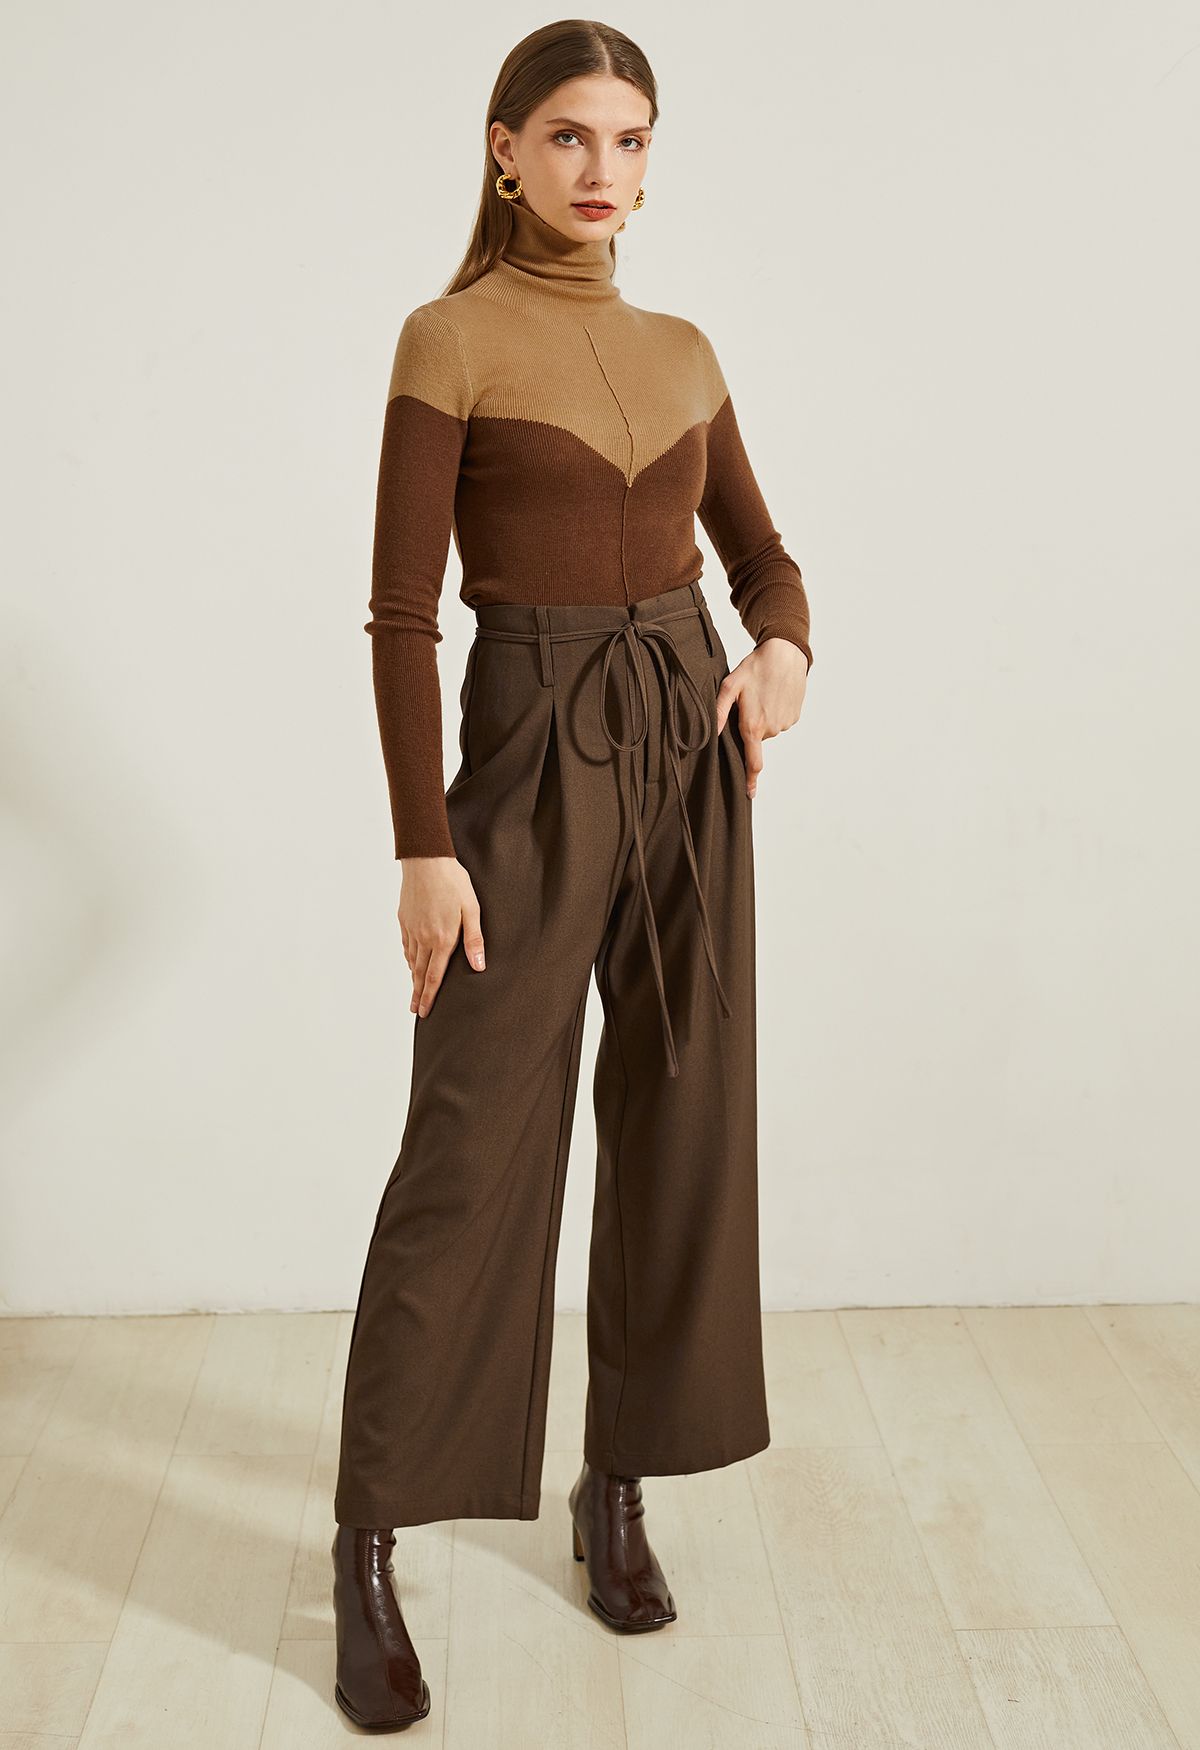 Turtleneck Two-Tone Fitted Knit Top in Brown